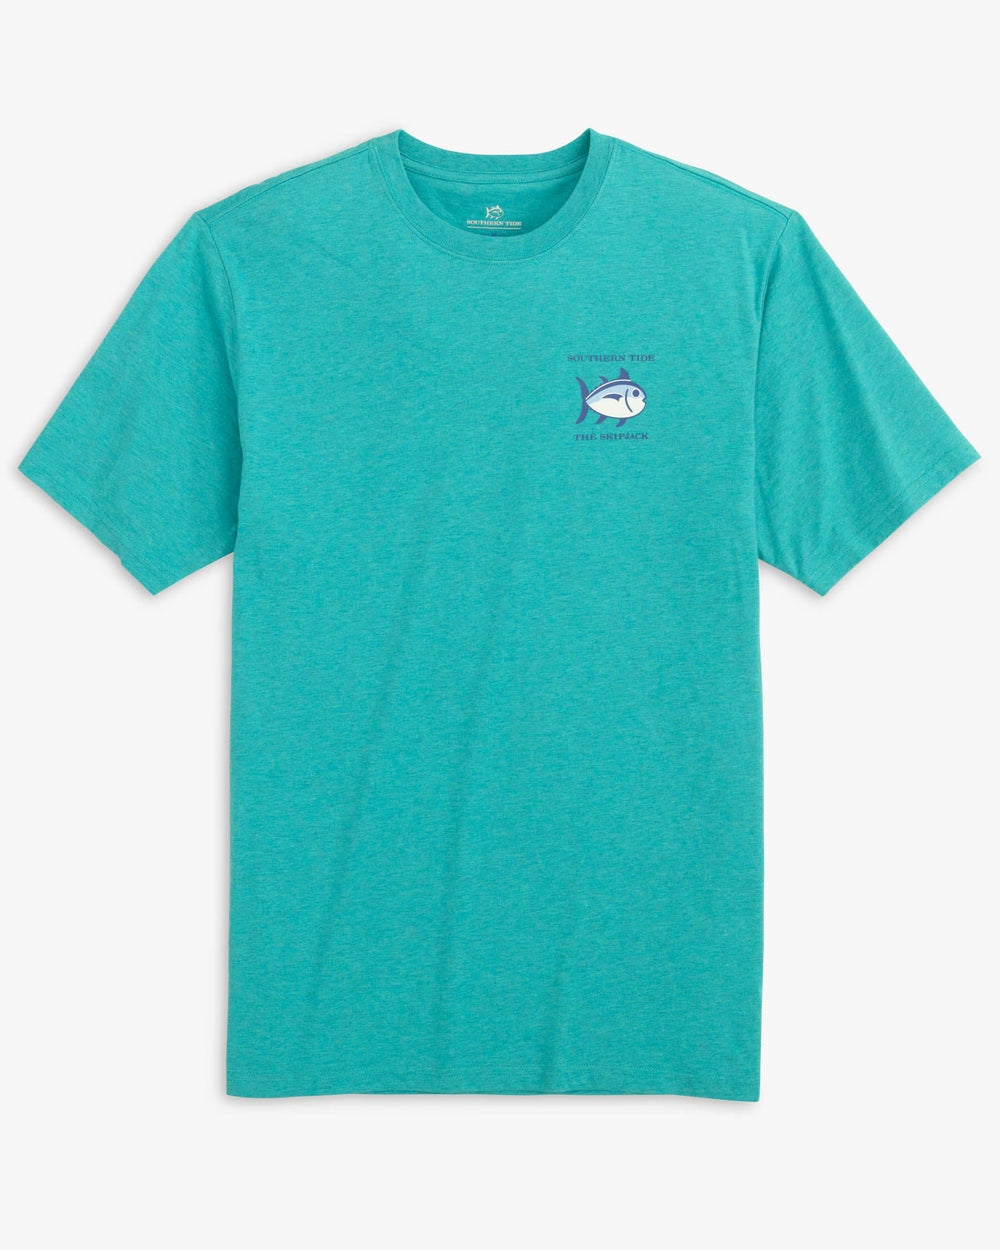 The back view of the Southern Tide Heather Original Skipjack T-Shirt 2 by Southern Tide - Heather Teal Depths